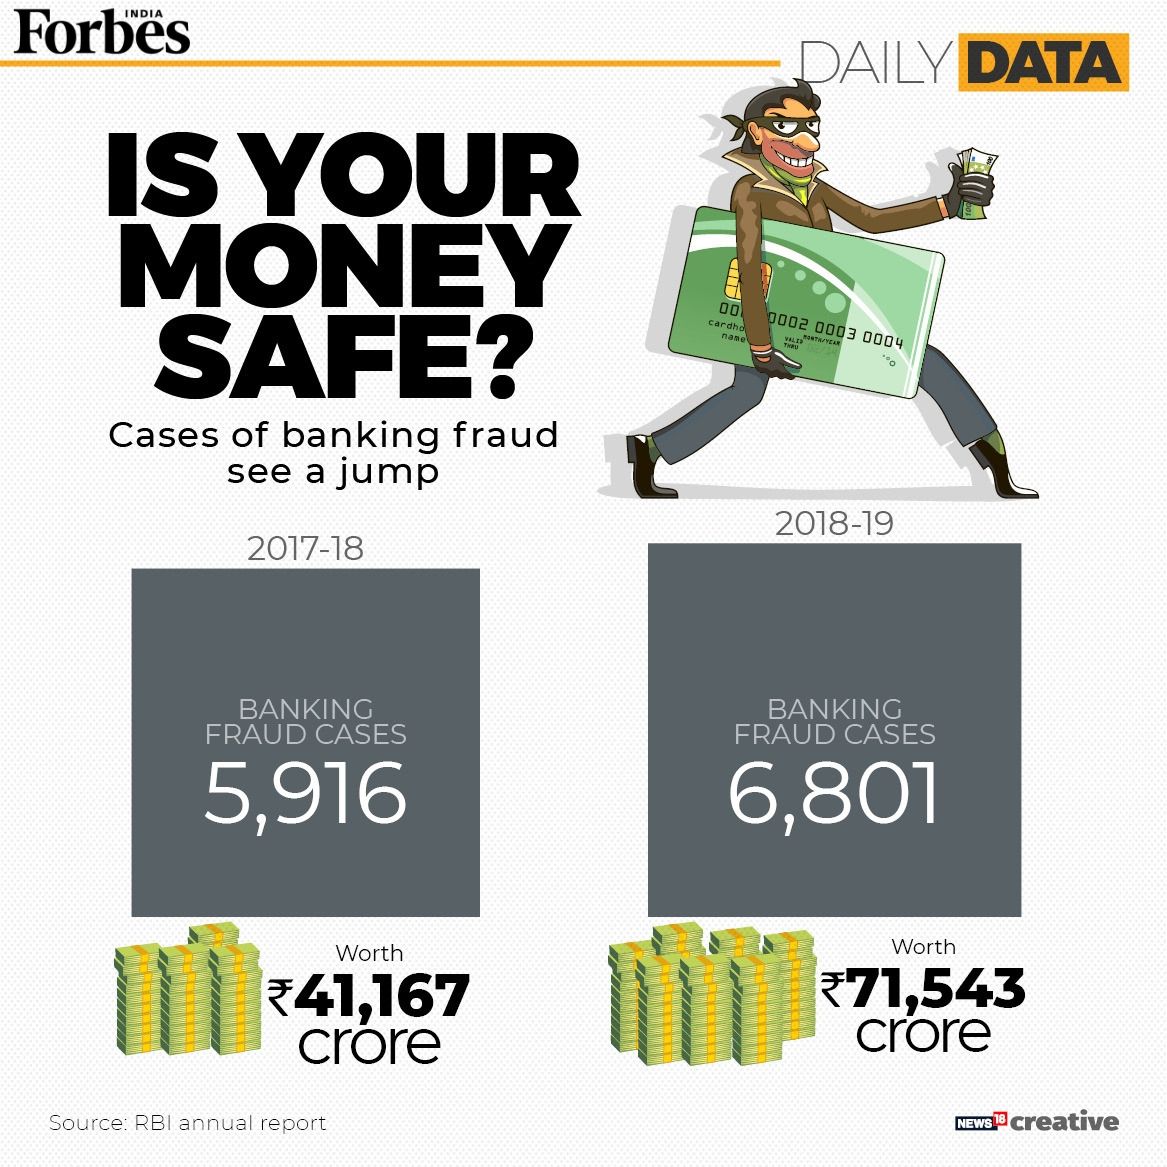 Is your money safe at Indian banks?